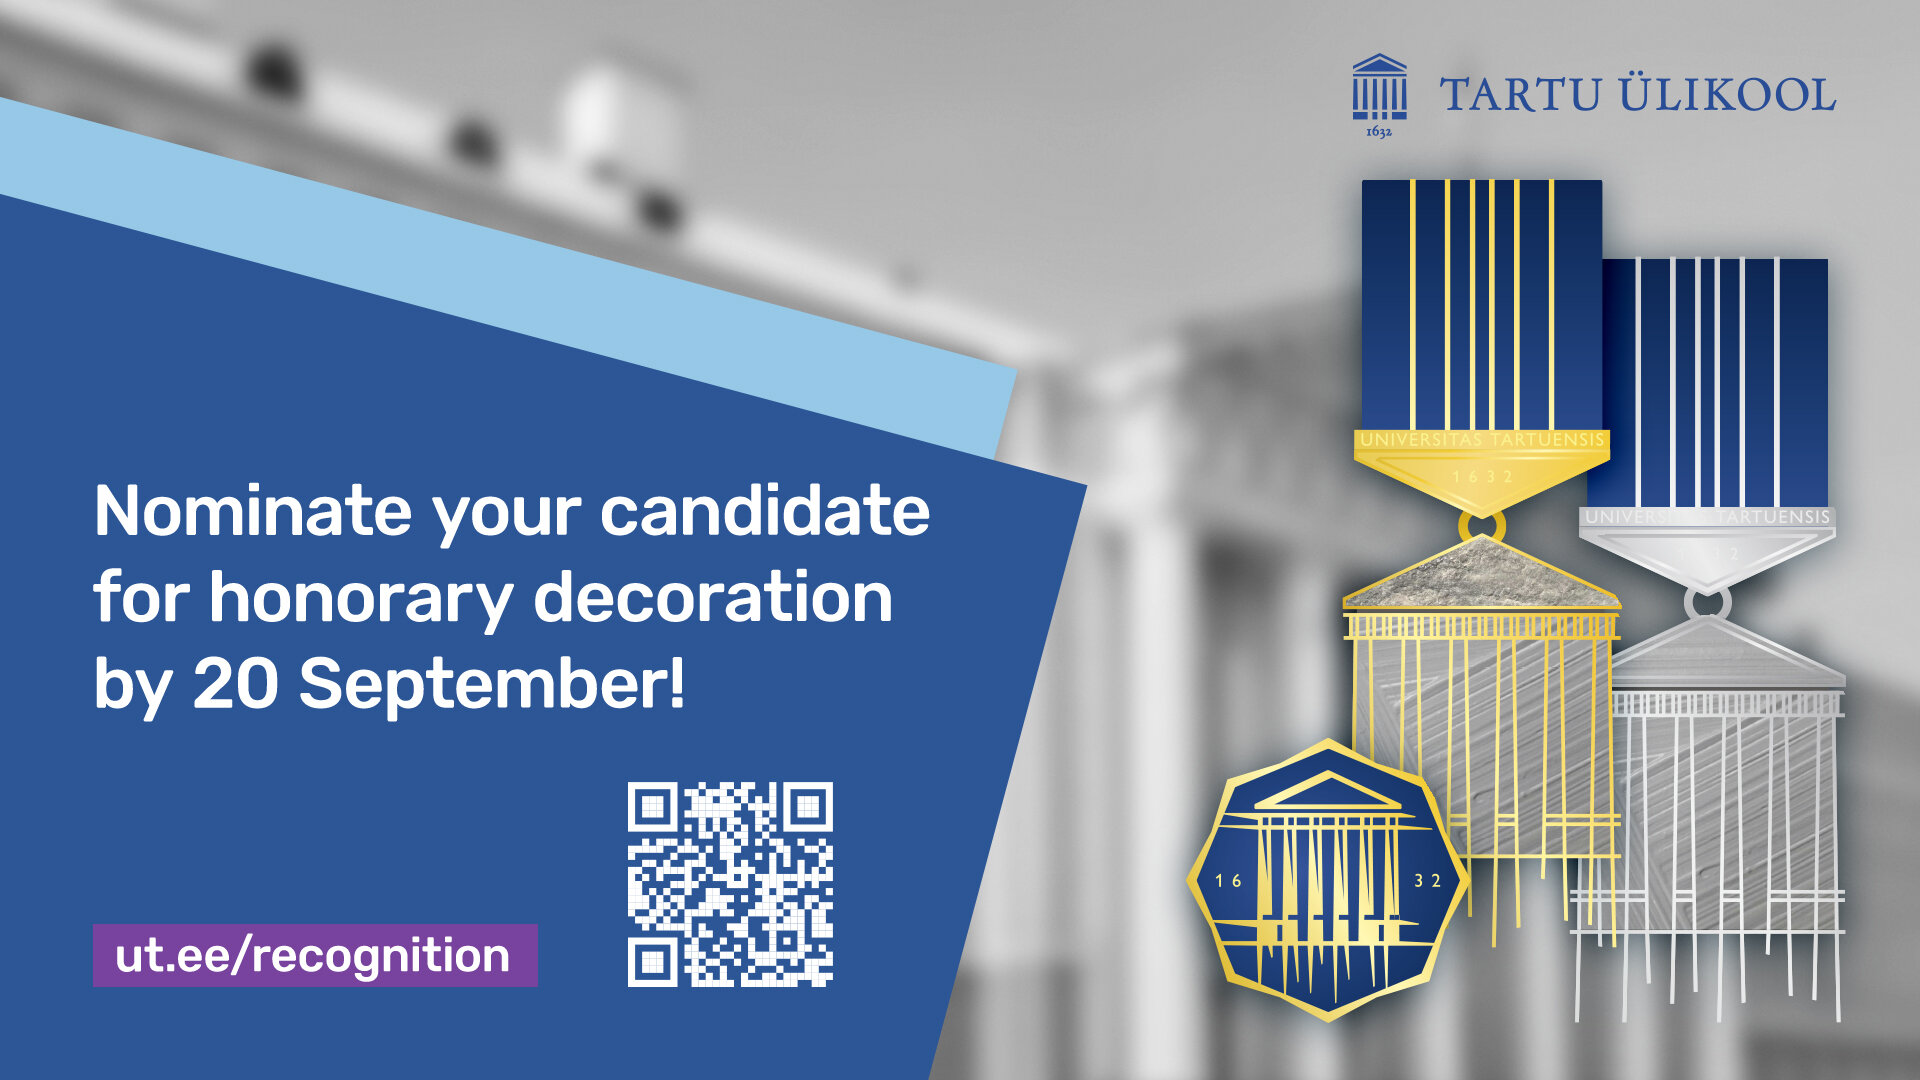 Nominate a candidate for awarding with honorary decoration until 20 September